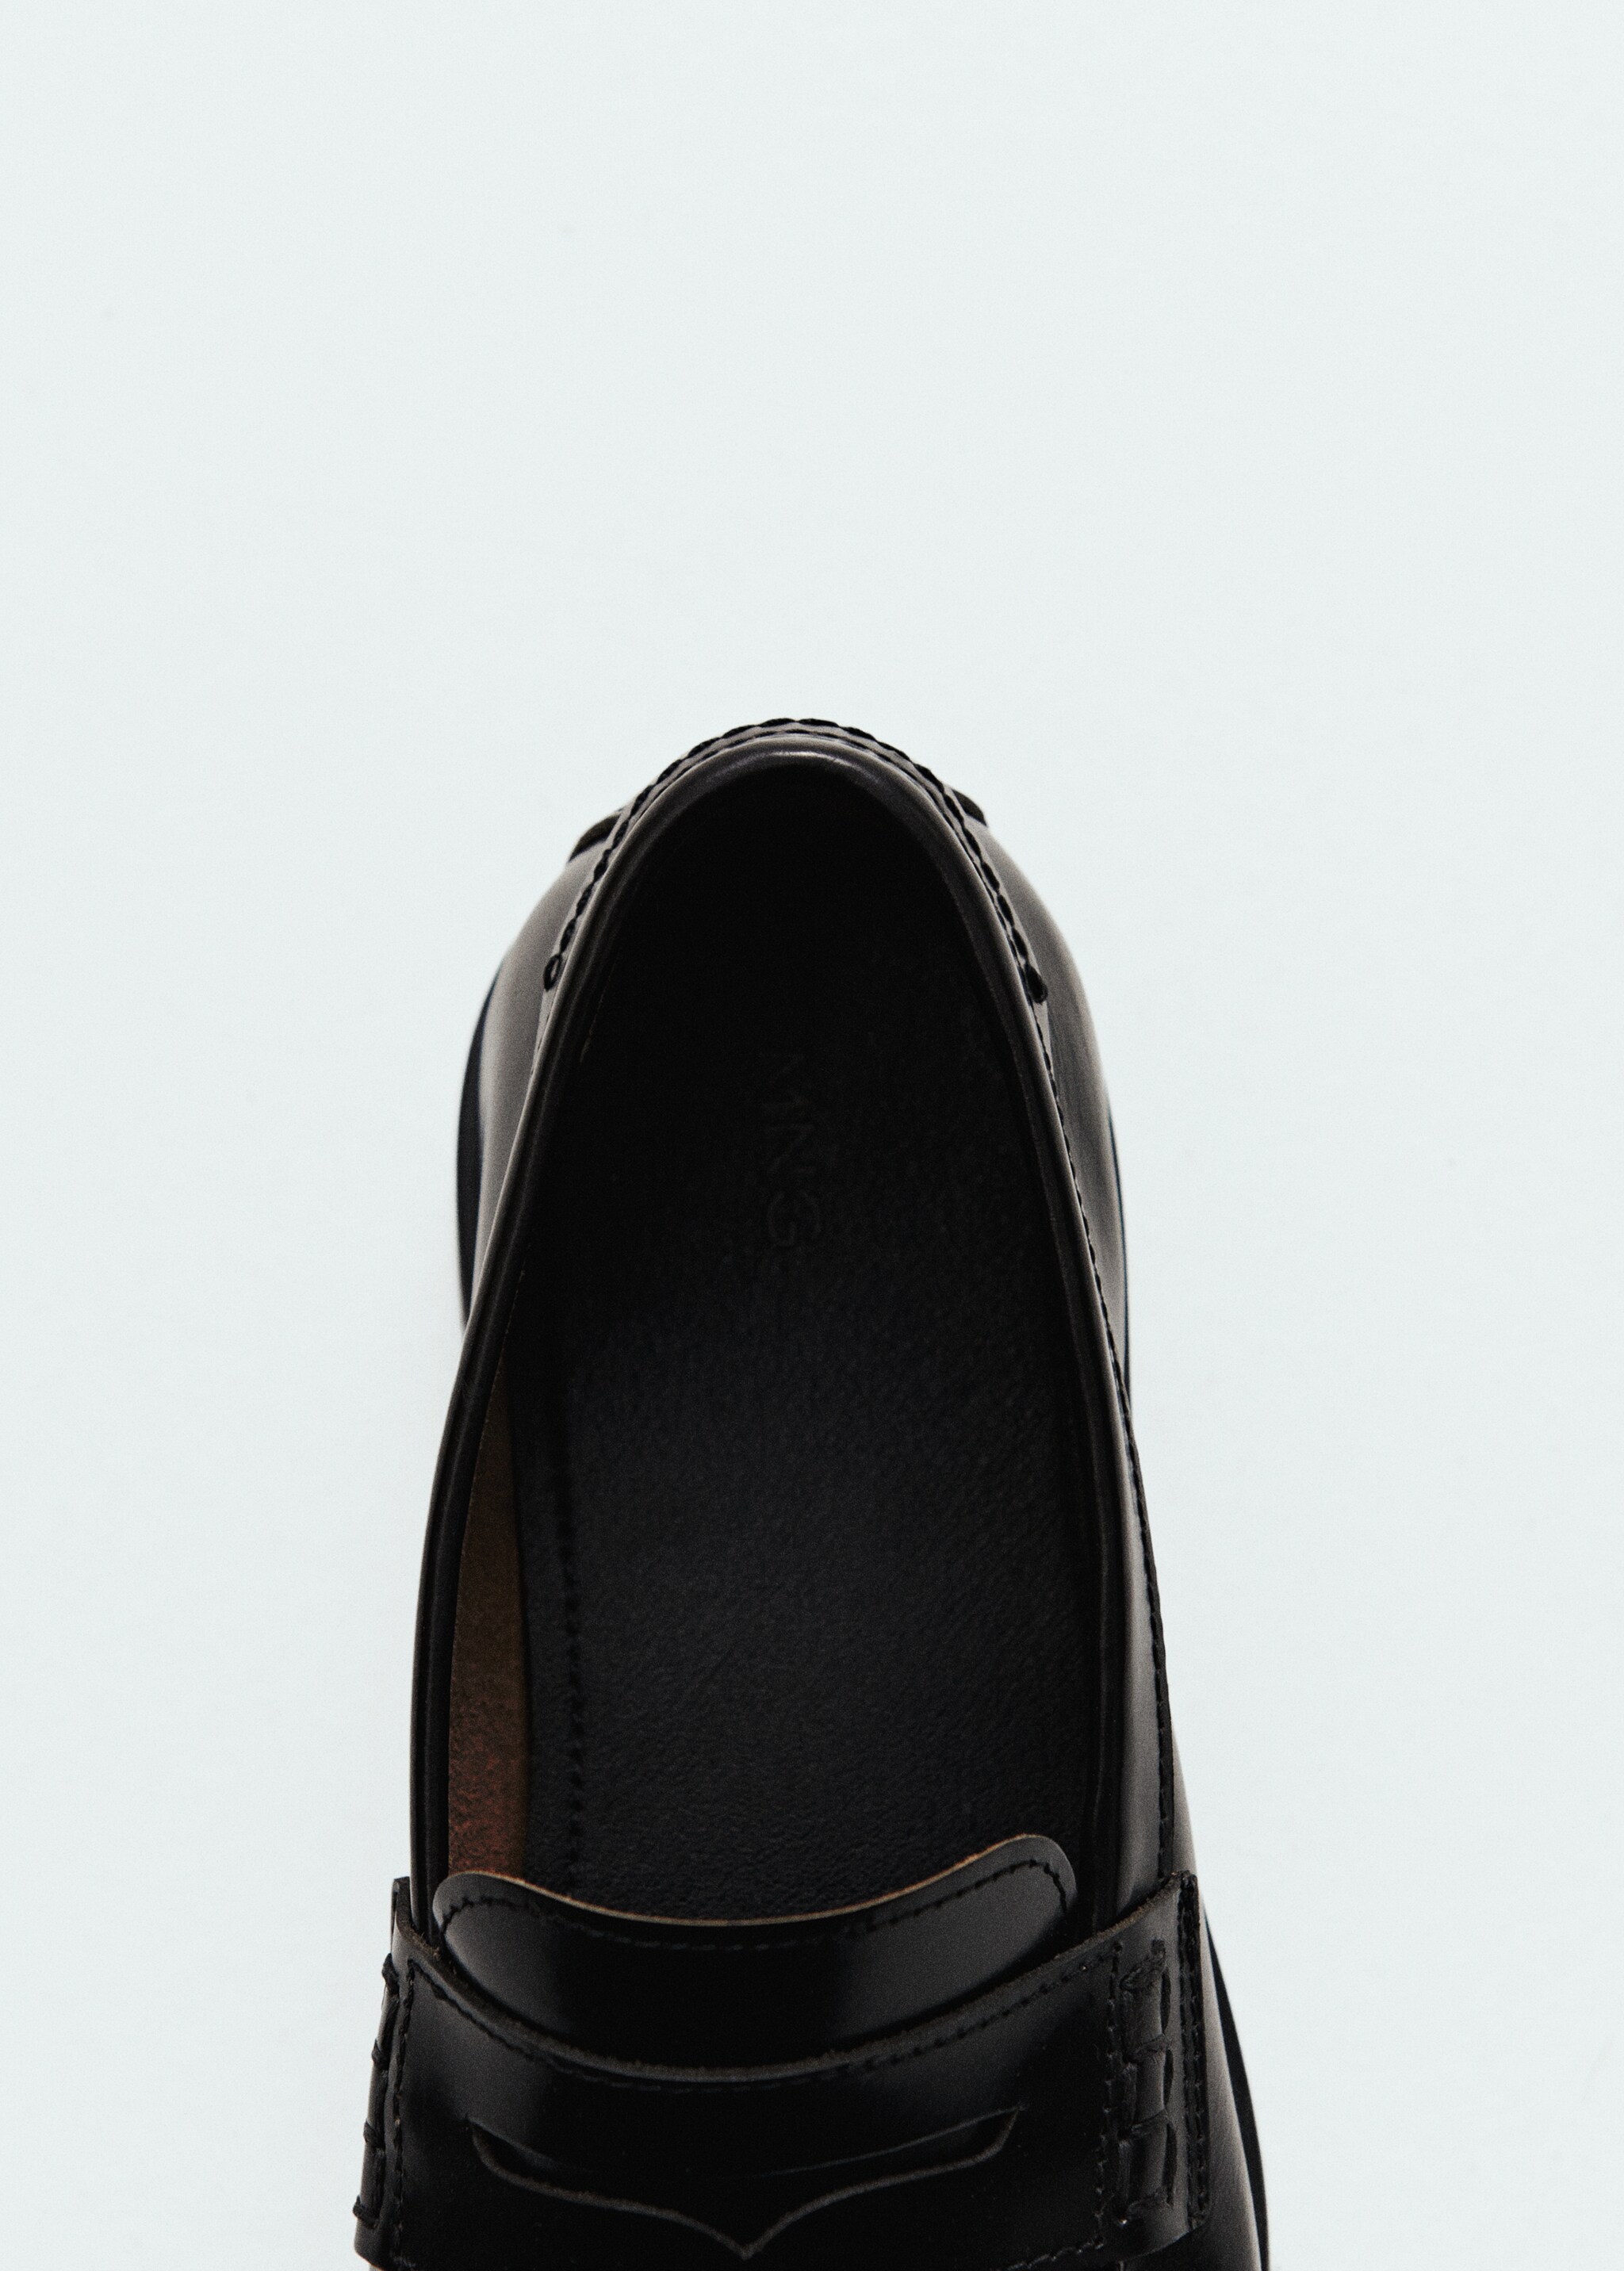 Aged-leather loafers - General plane